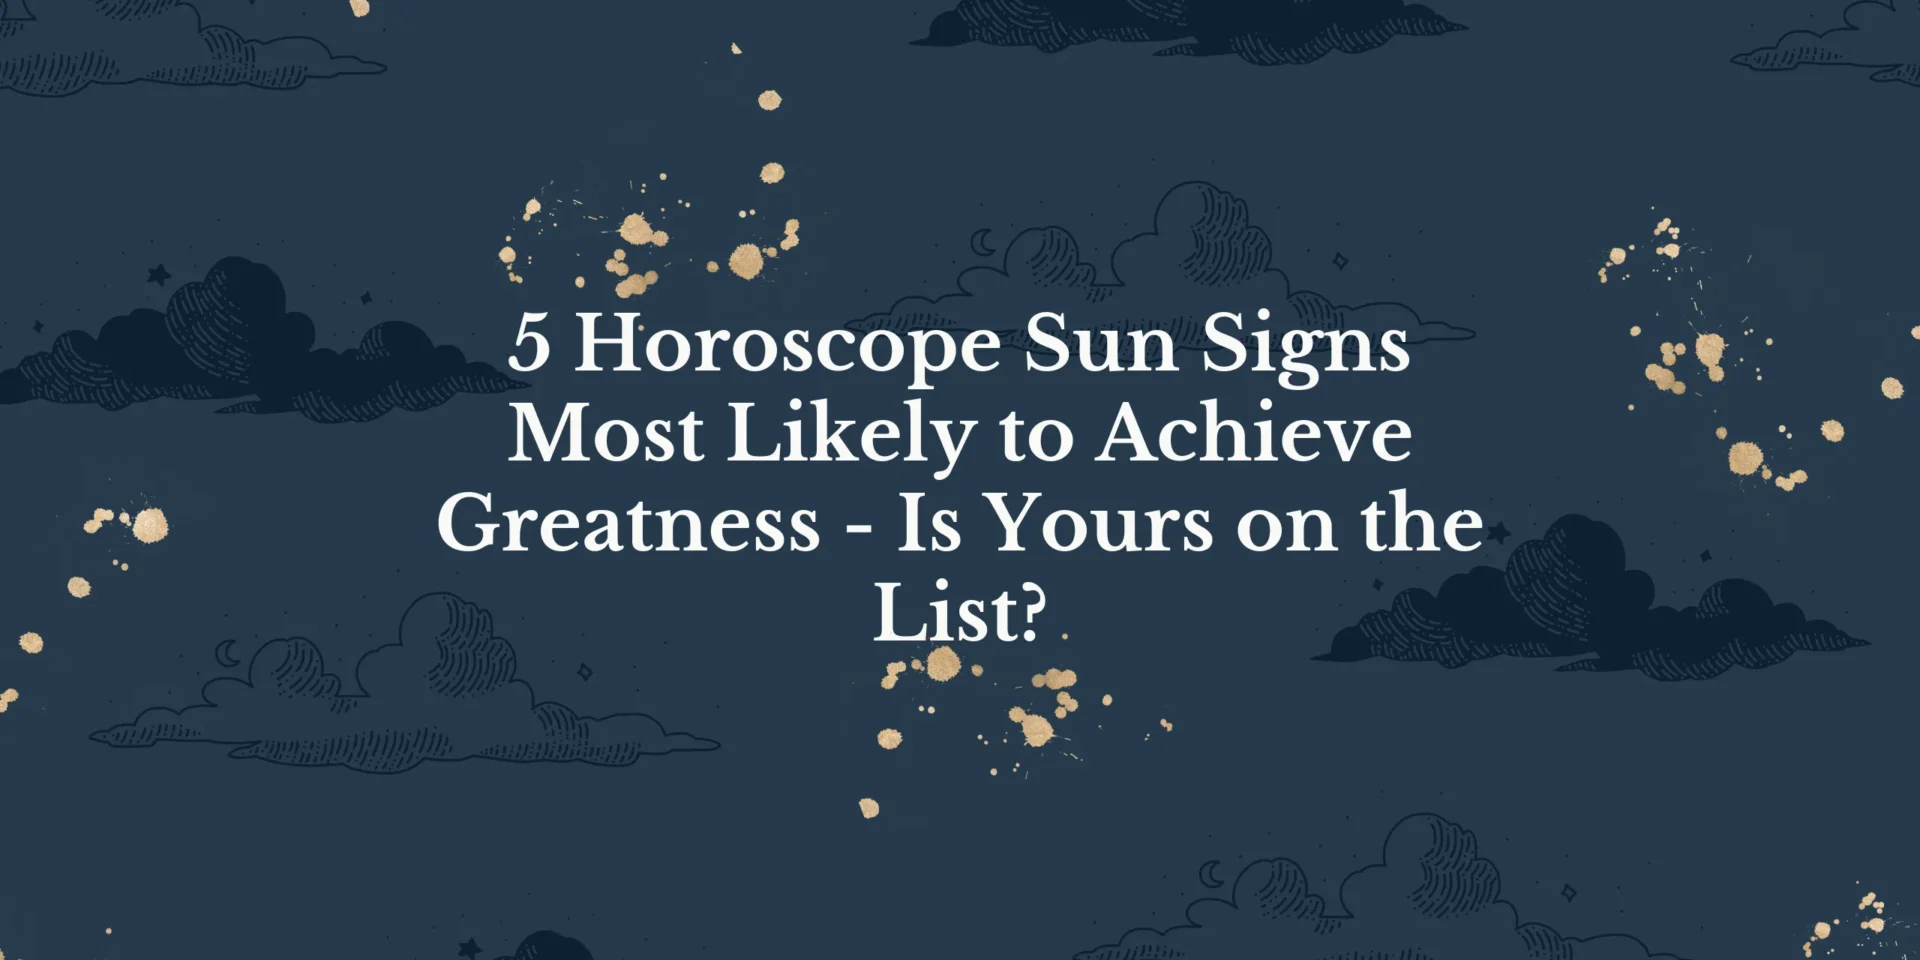 5 Horoscope Sun Signs Most Likely to Achieve Greatness - Is Yours on the List?